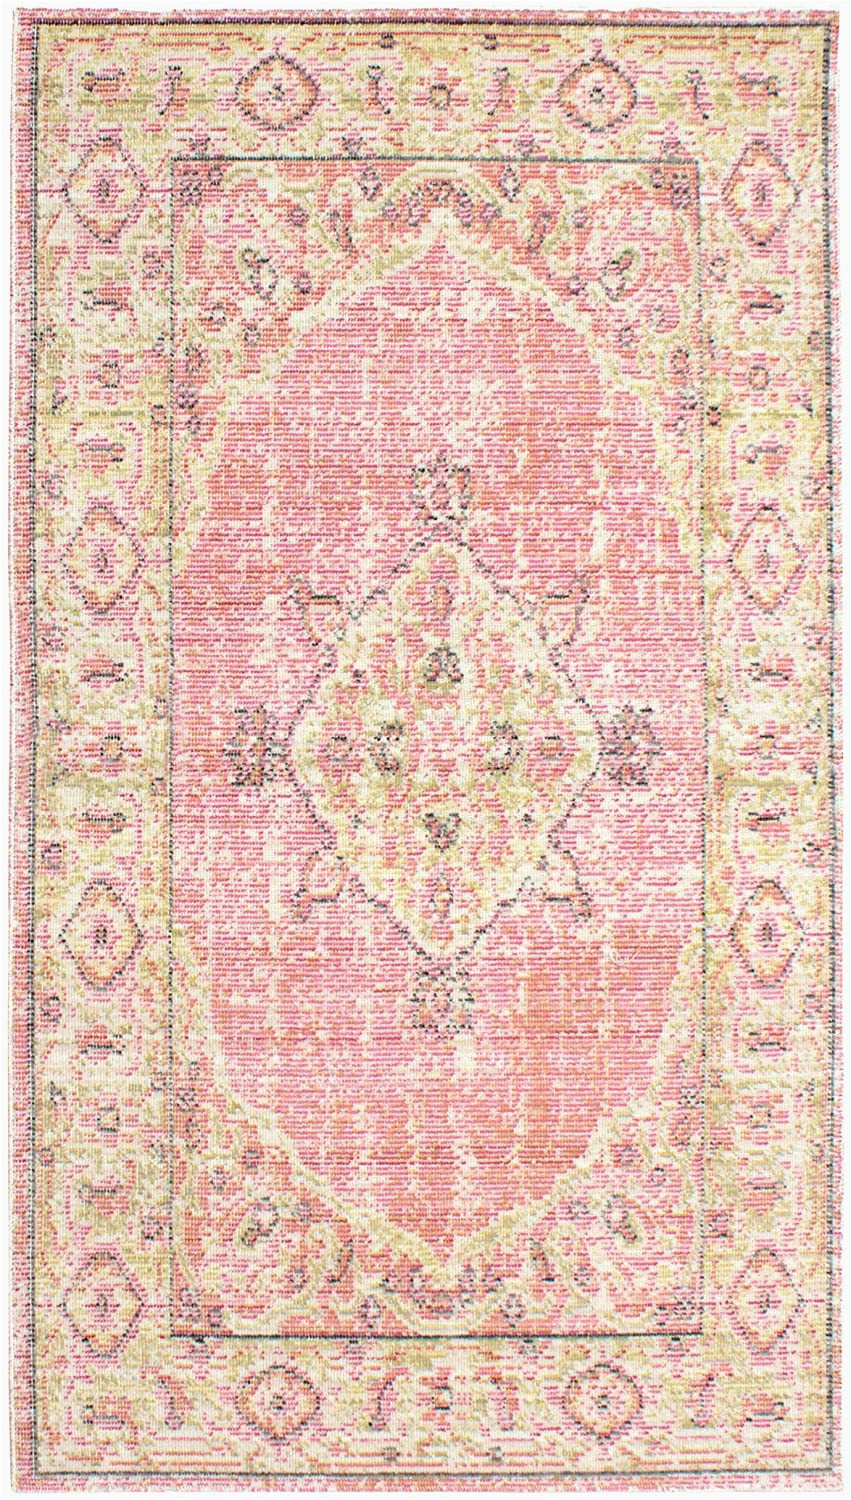 French Connection Home Bath Rug French Connection Kenora Accent Rug 27×46 Pink Amazon Co